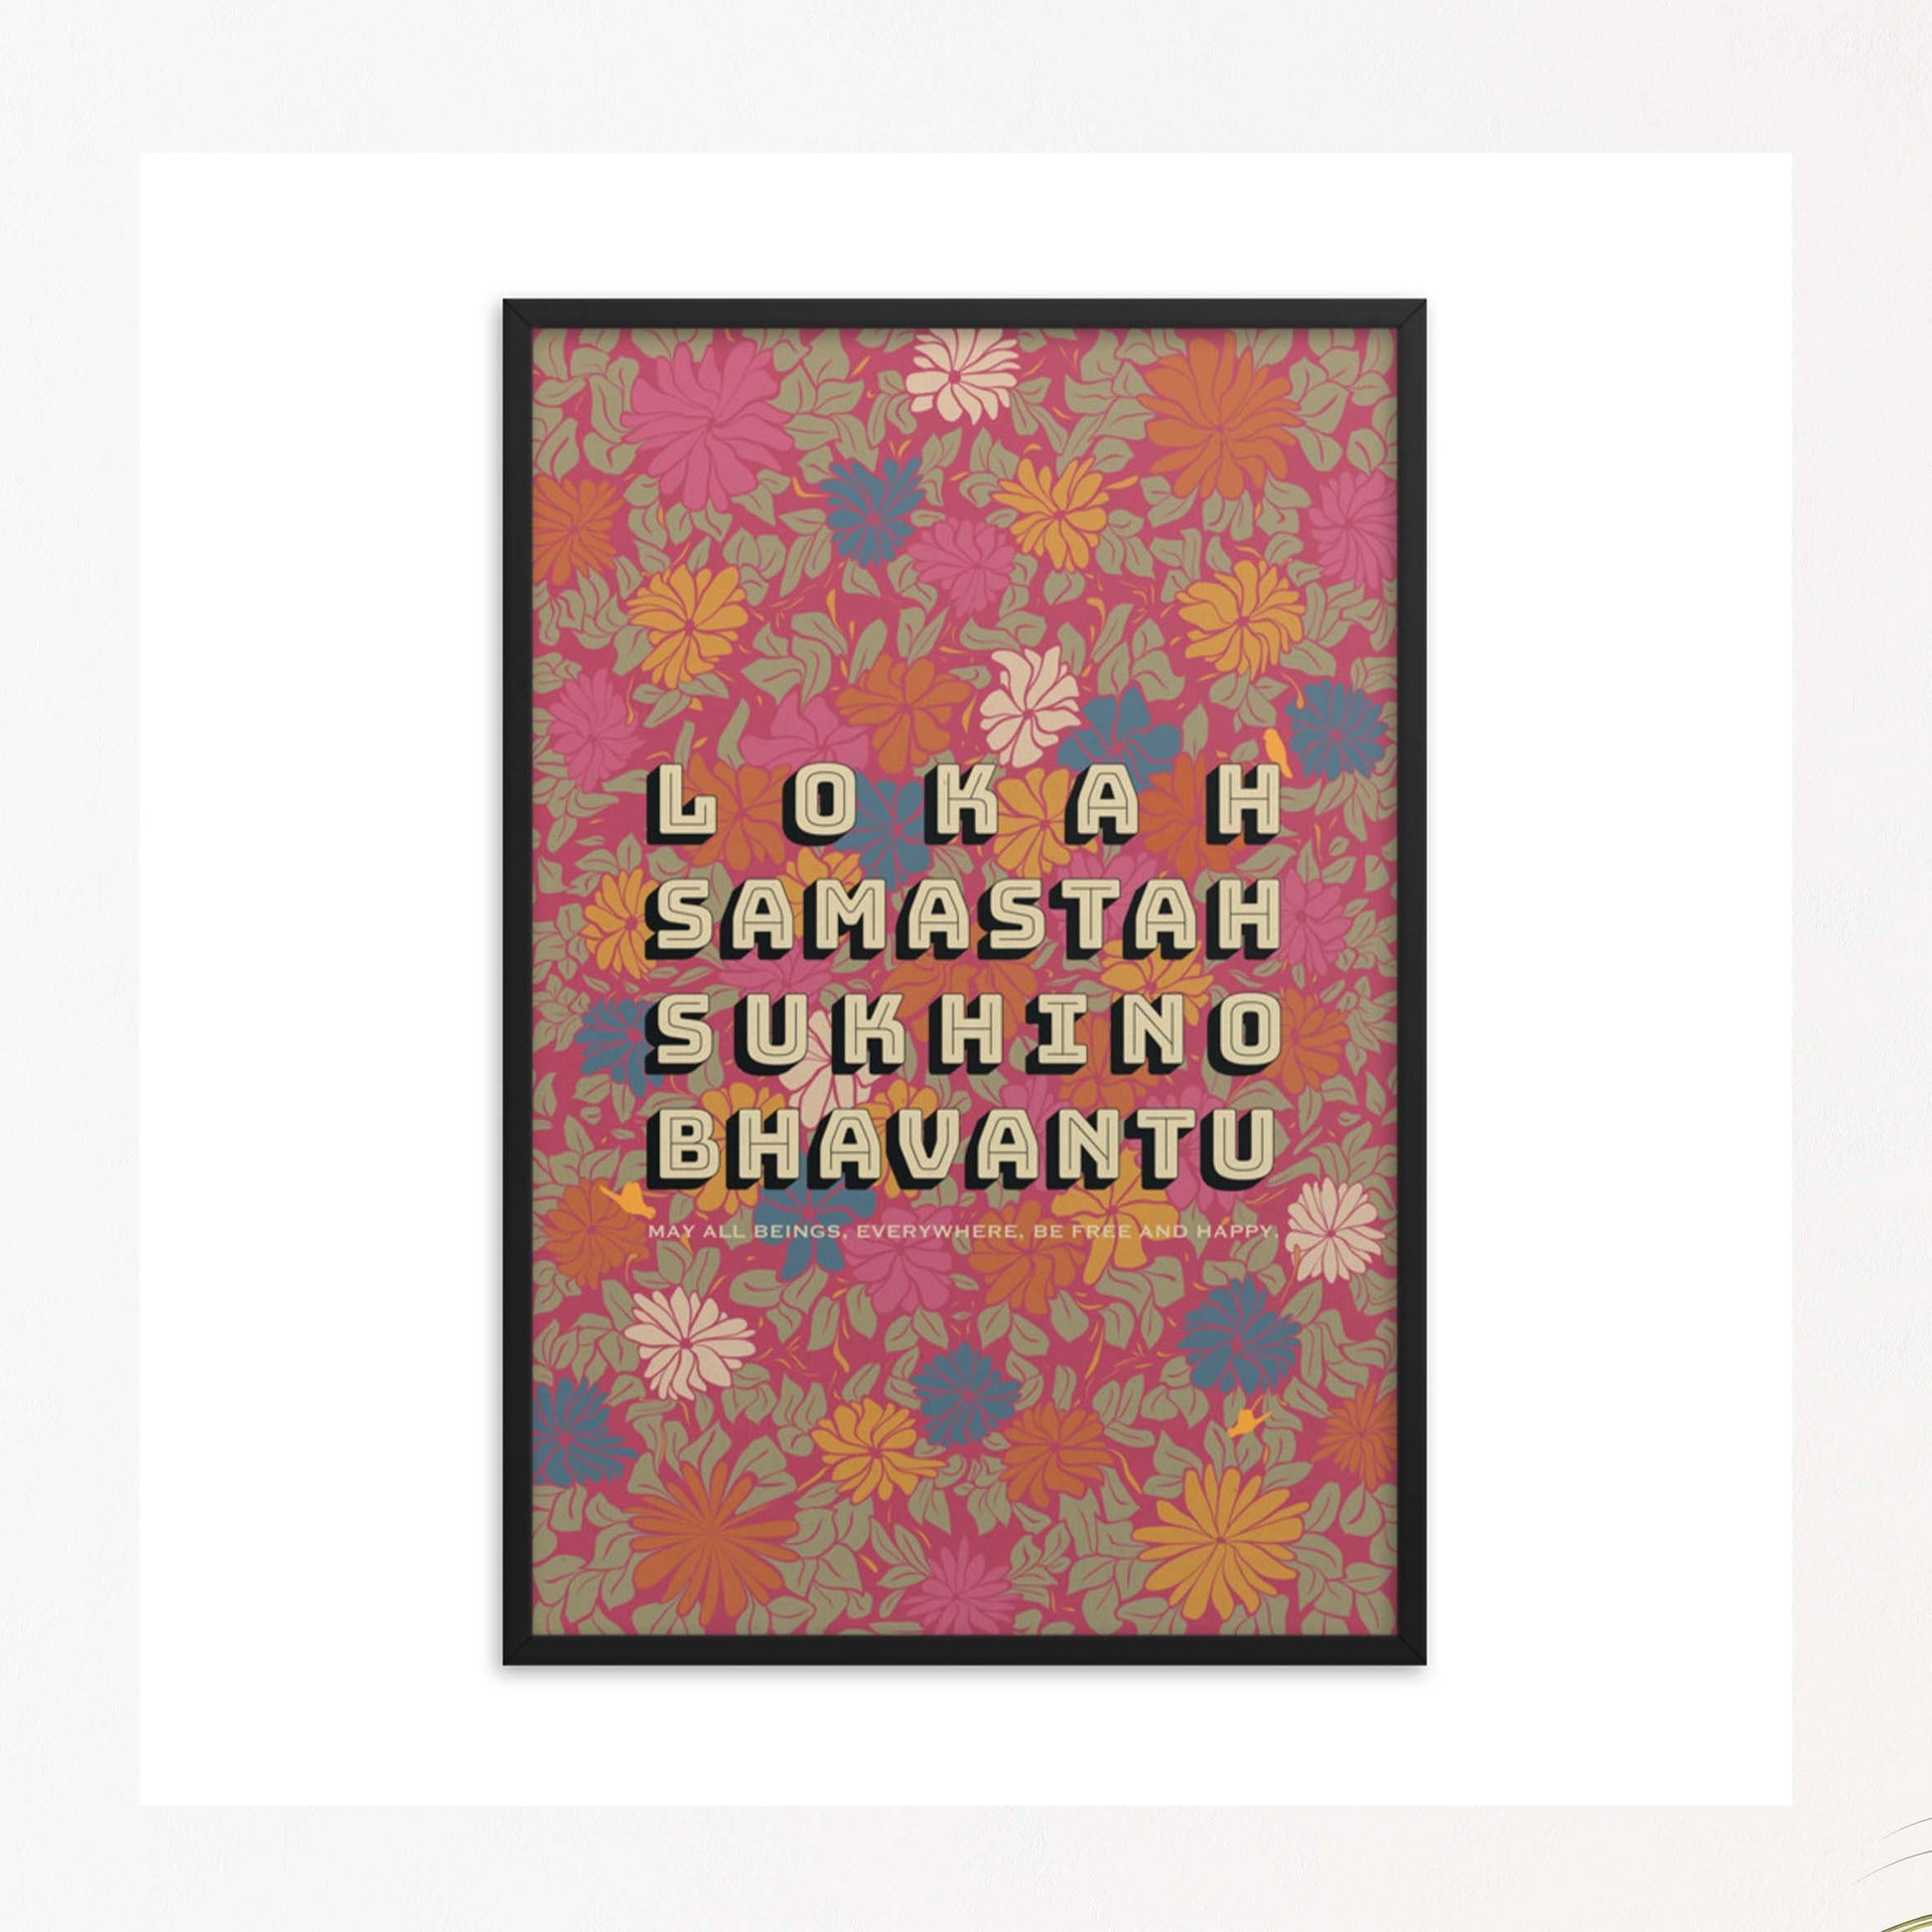 Lokah samastah mantra with meaning in english on pink floral background black framed poster